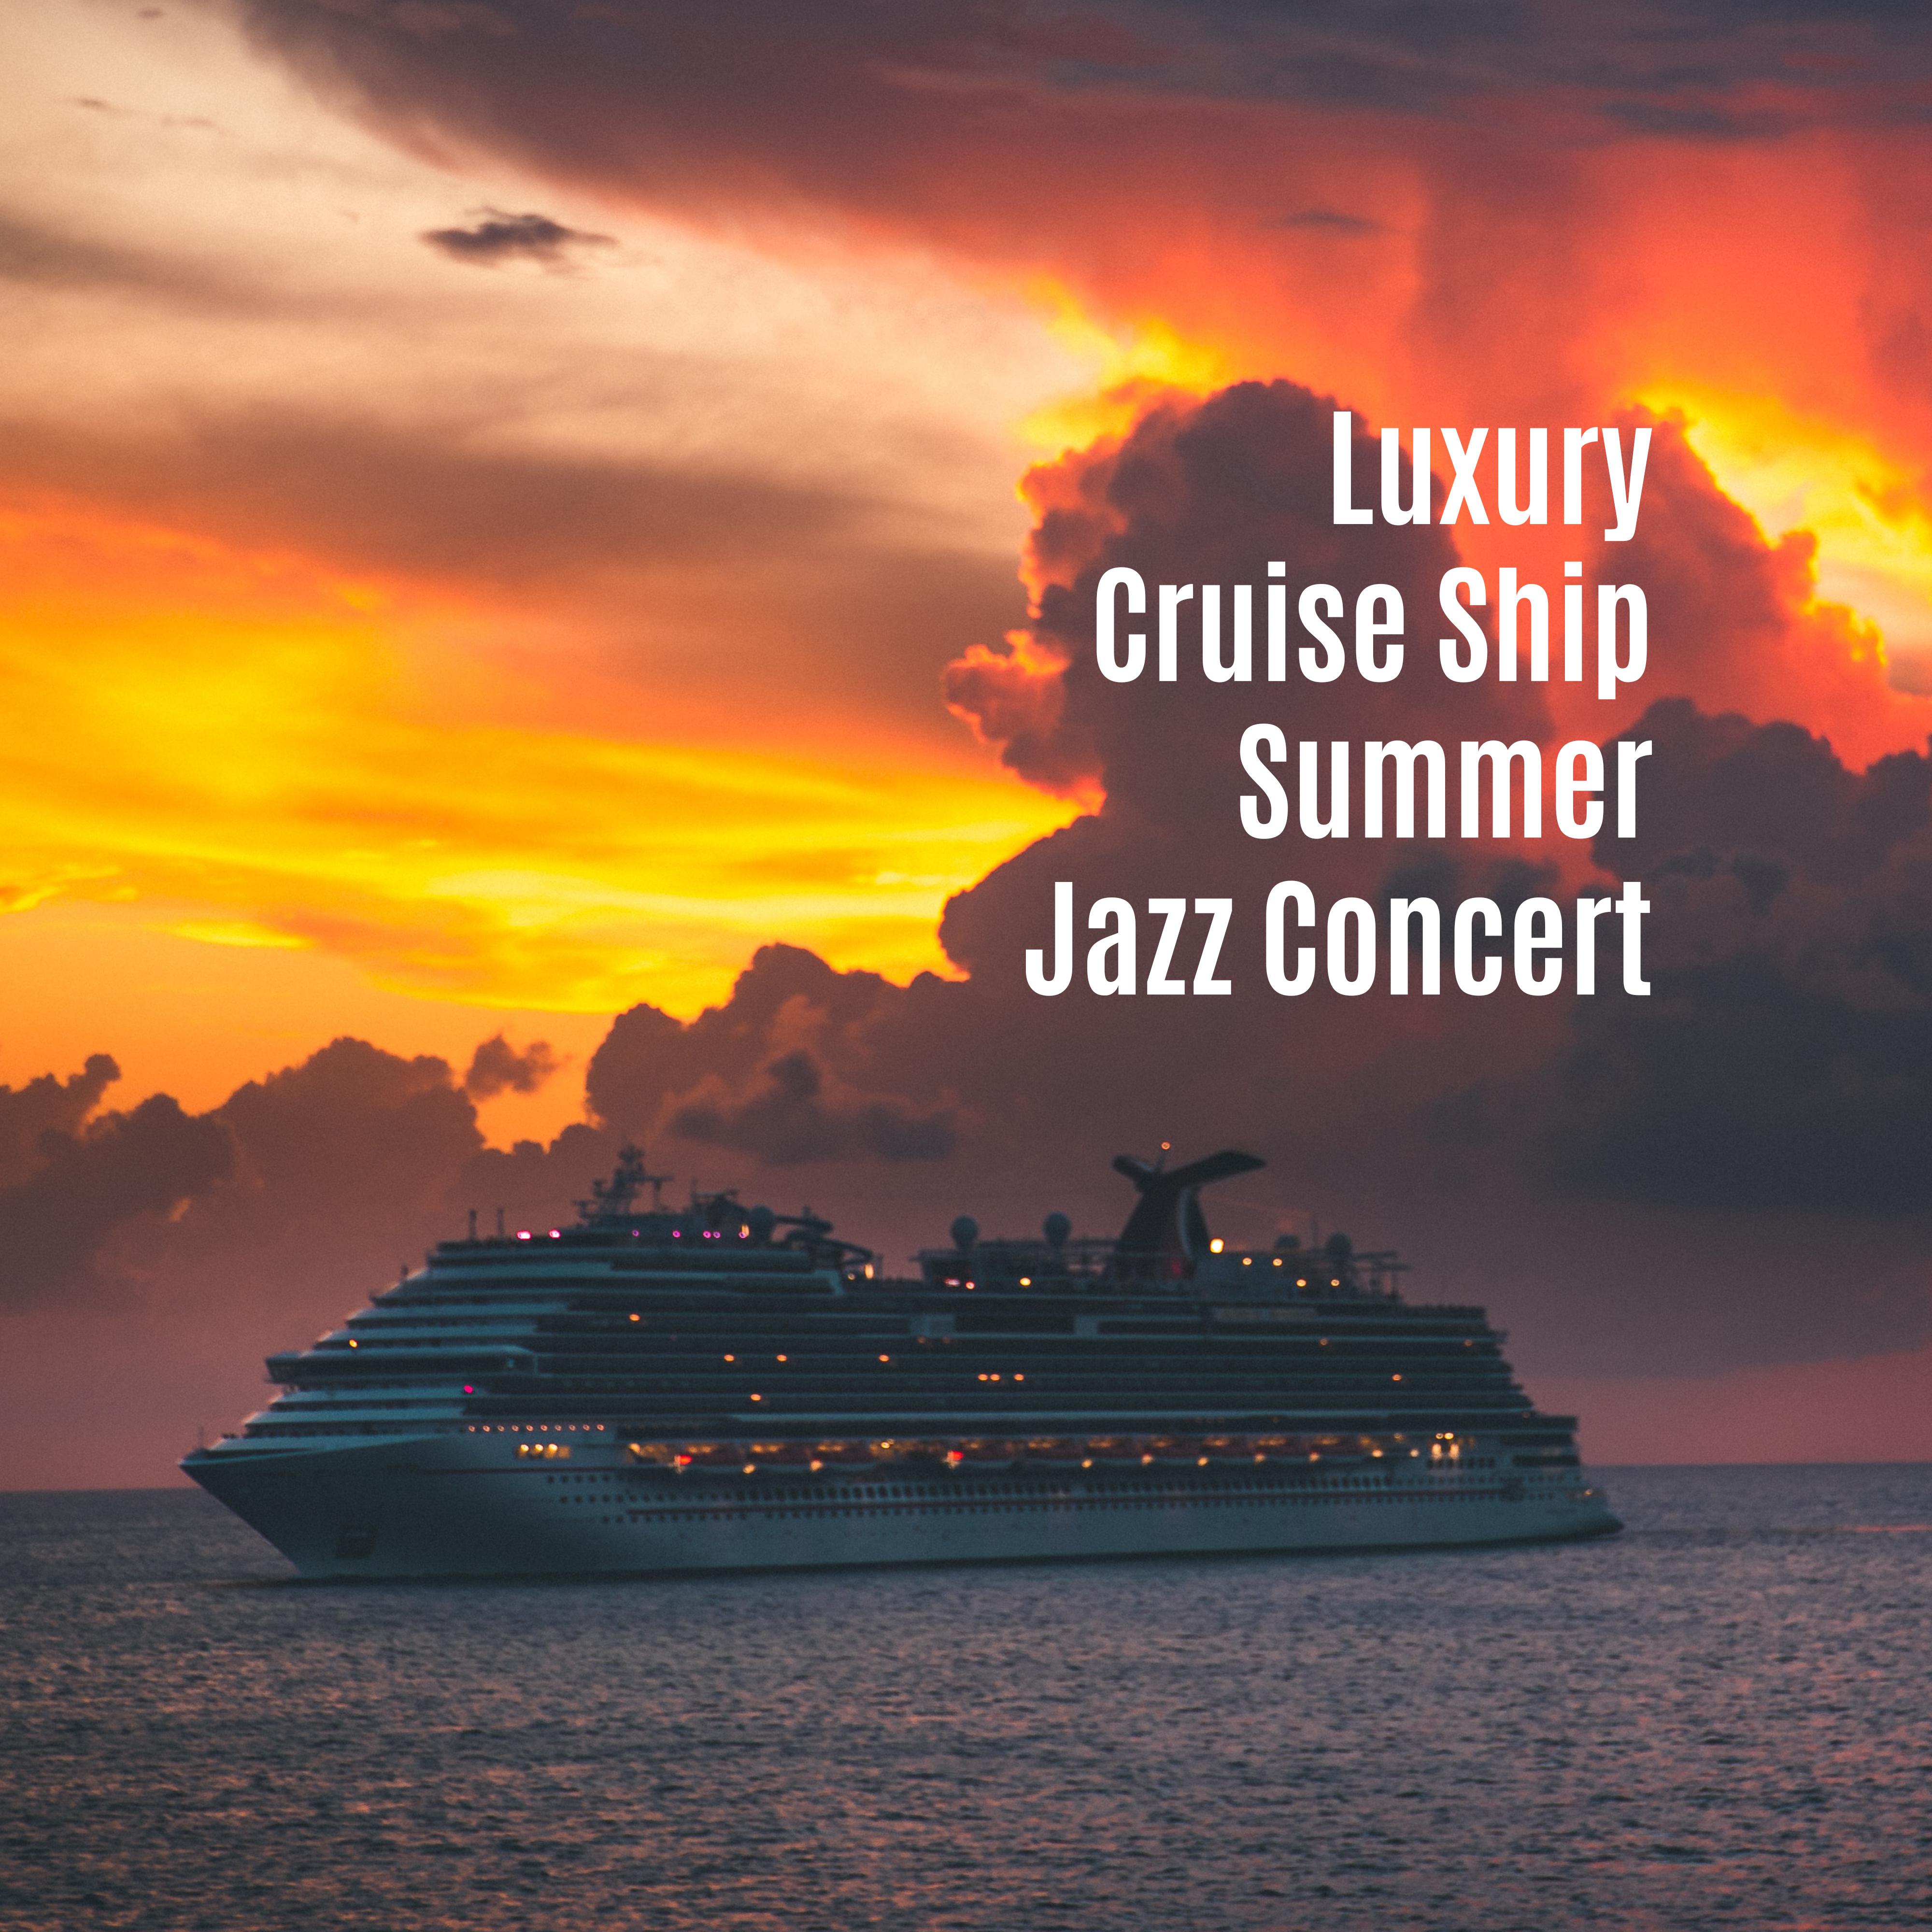 Luxury Cruise Ship Summer Jazz Concert: 2019 Smooth Jazz Instrumental Music Collection for Elegant Places, Vintage Melodies Played on Piano, Contrabass, Trumpet & Many More